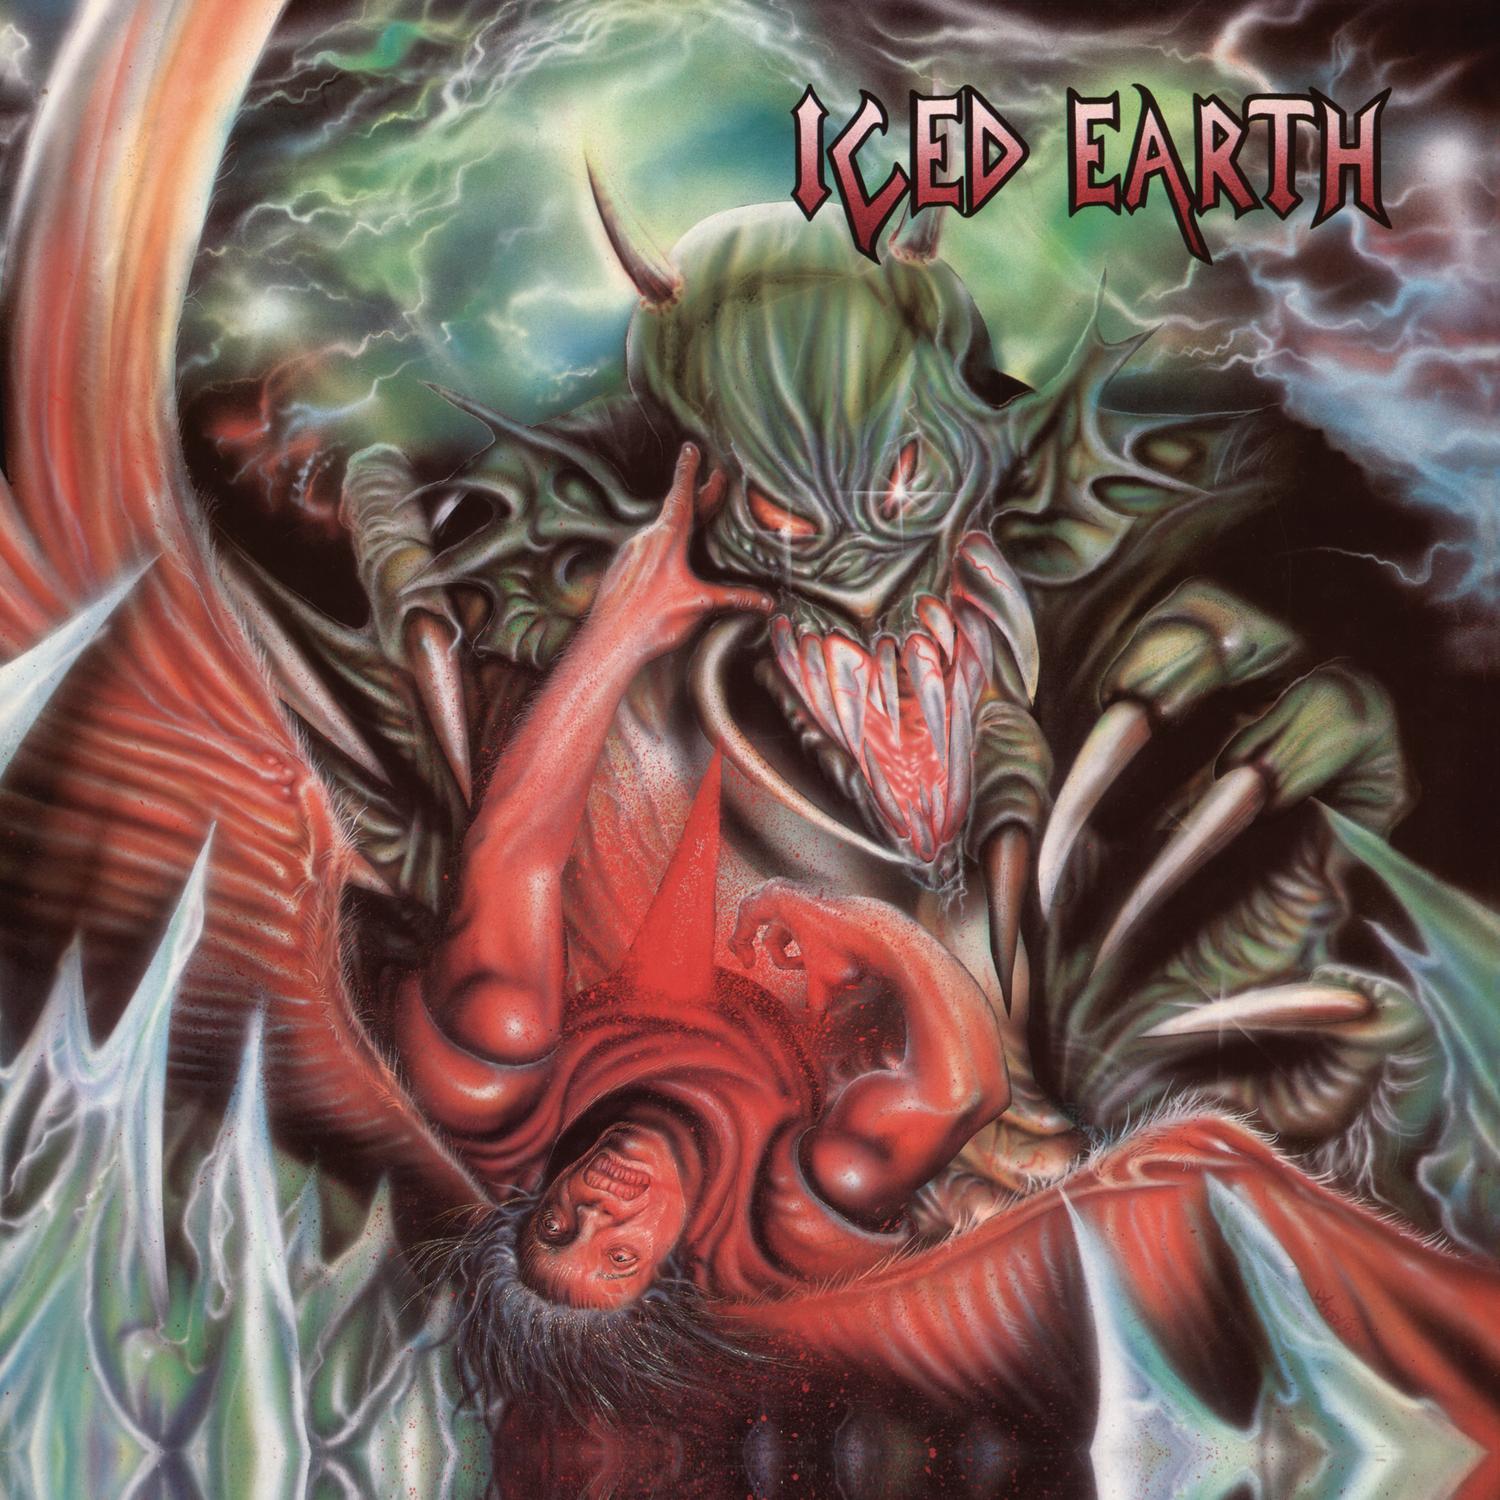 ICED EARTH (30TH ANNIVERSARY EDITION)